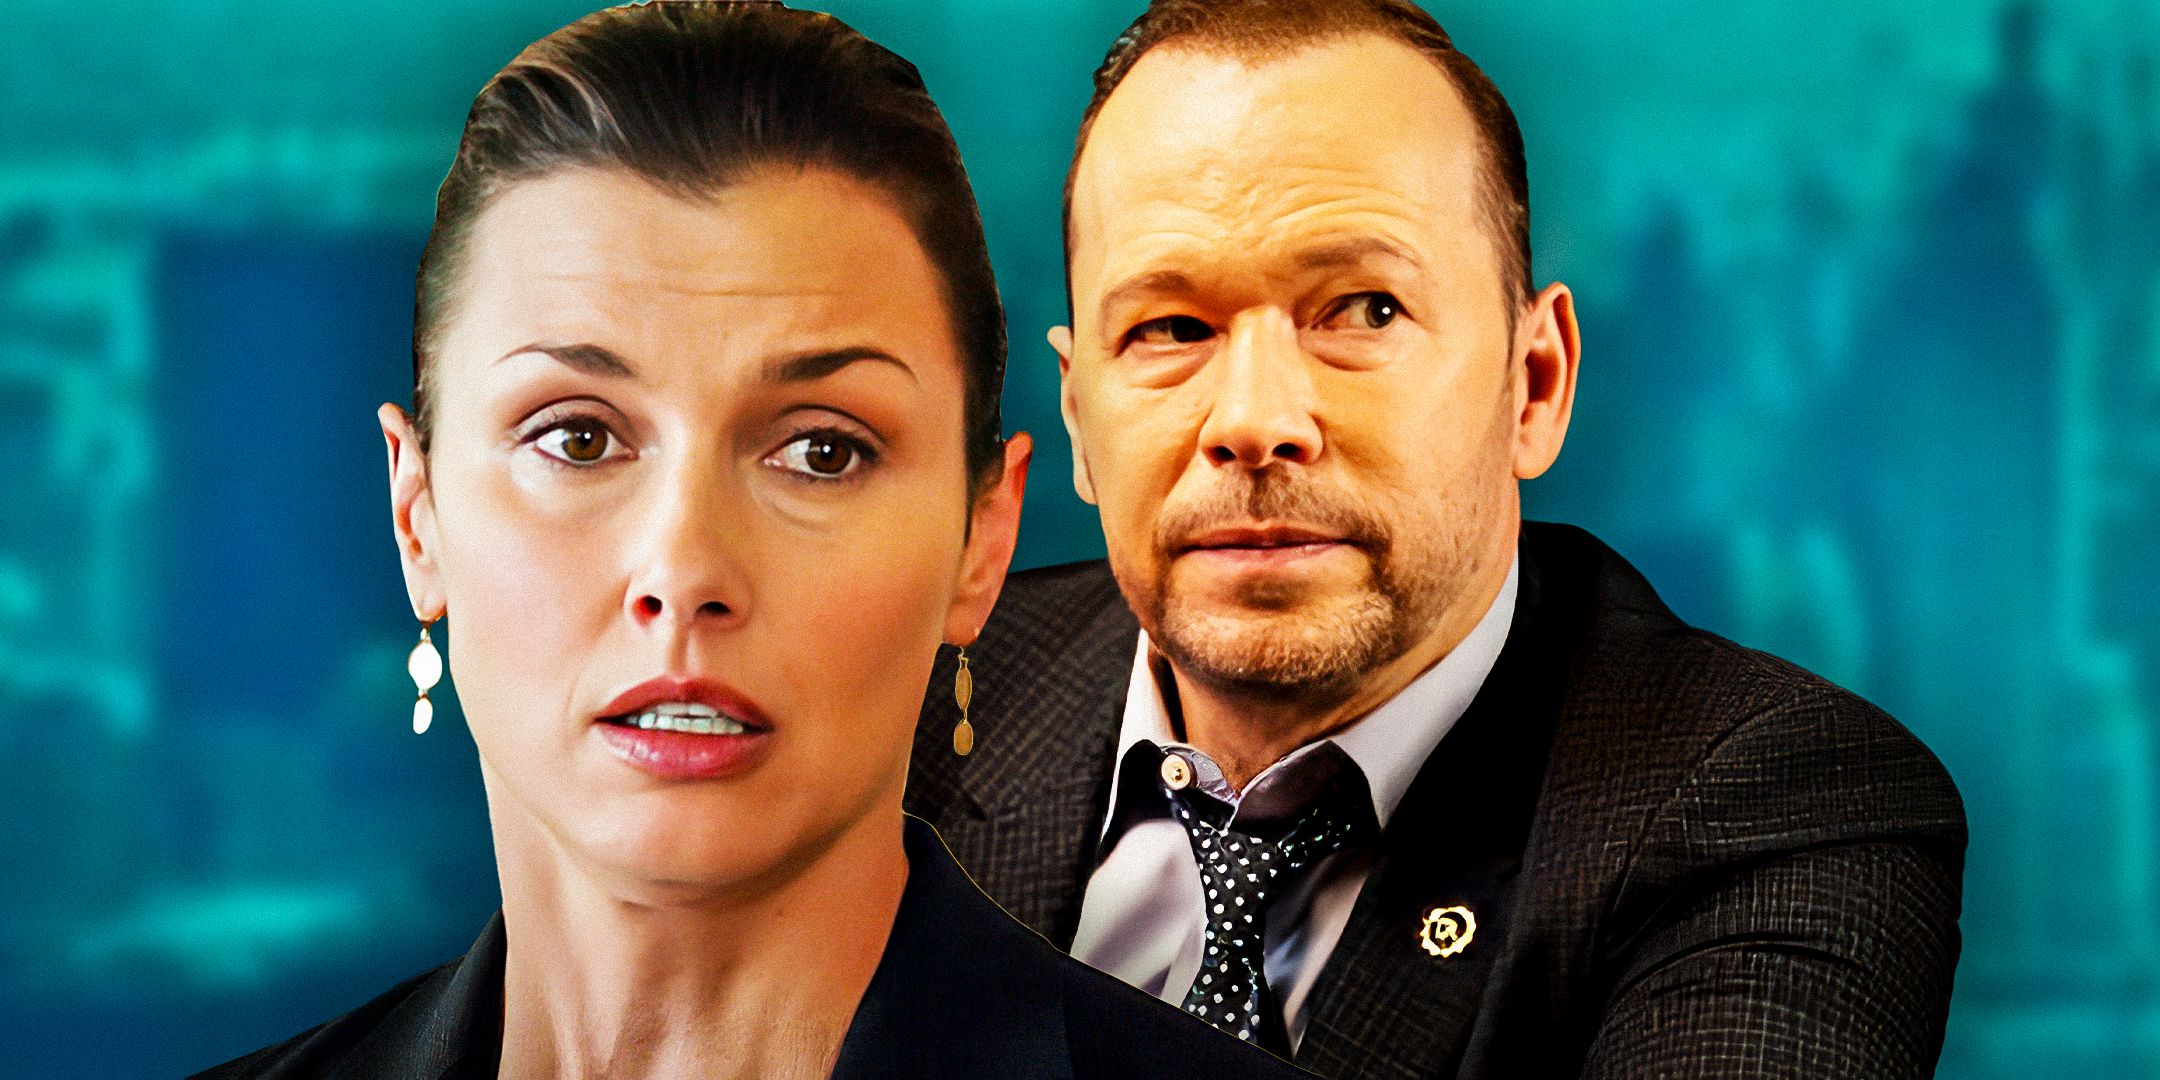 Donnie Wahlberg and Bridget Moynahan from Blue Bloods